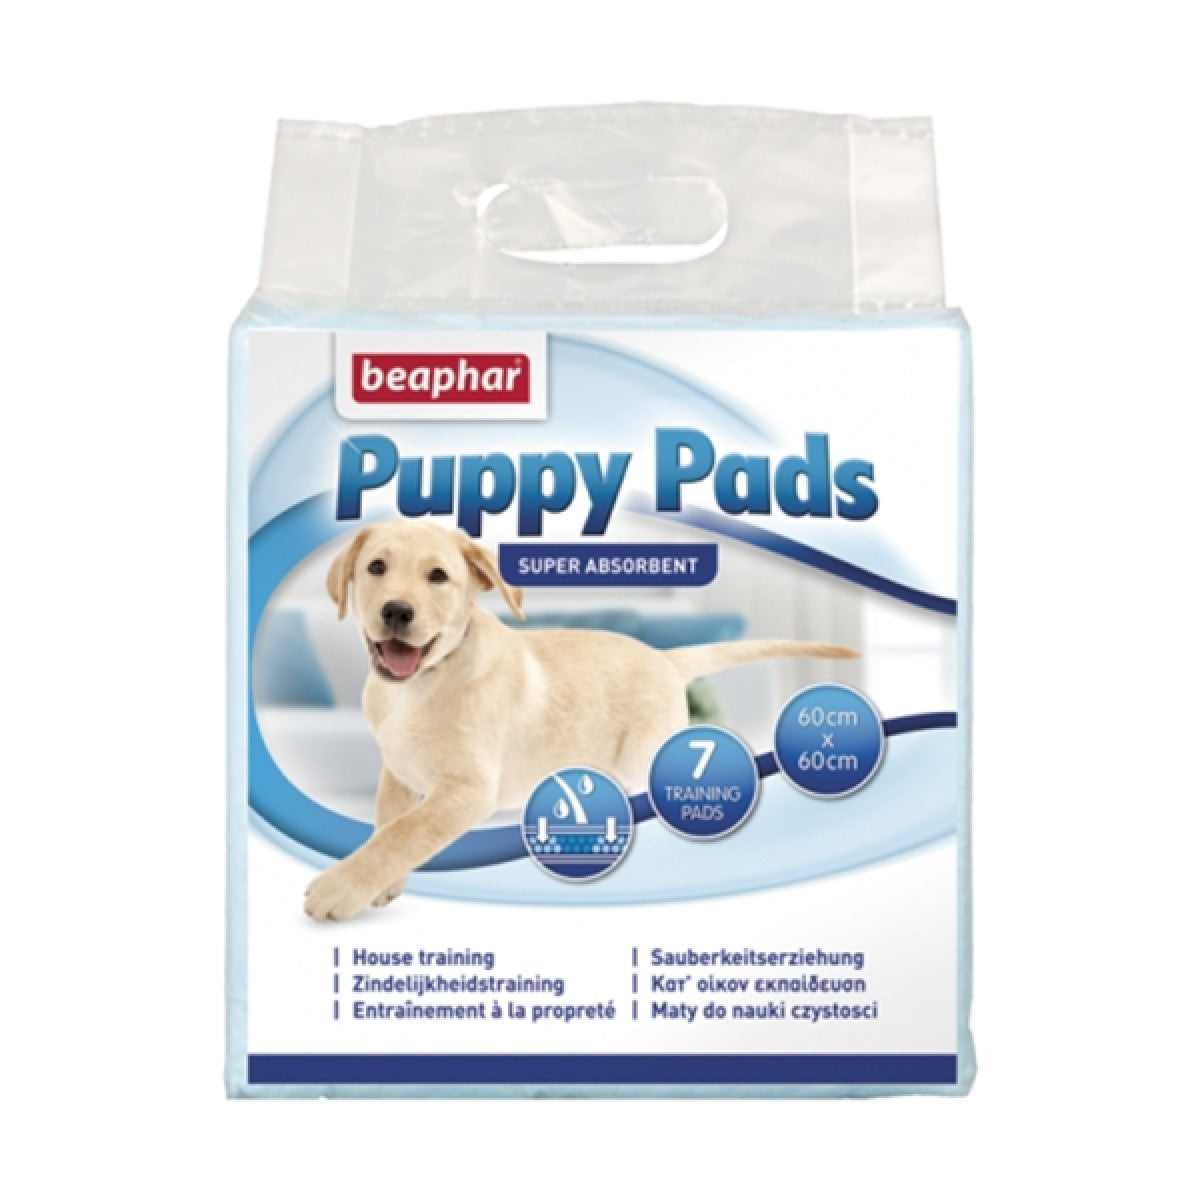 Beaphar Puppy Pads Pack of 7